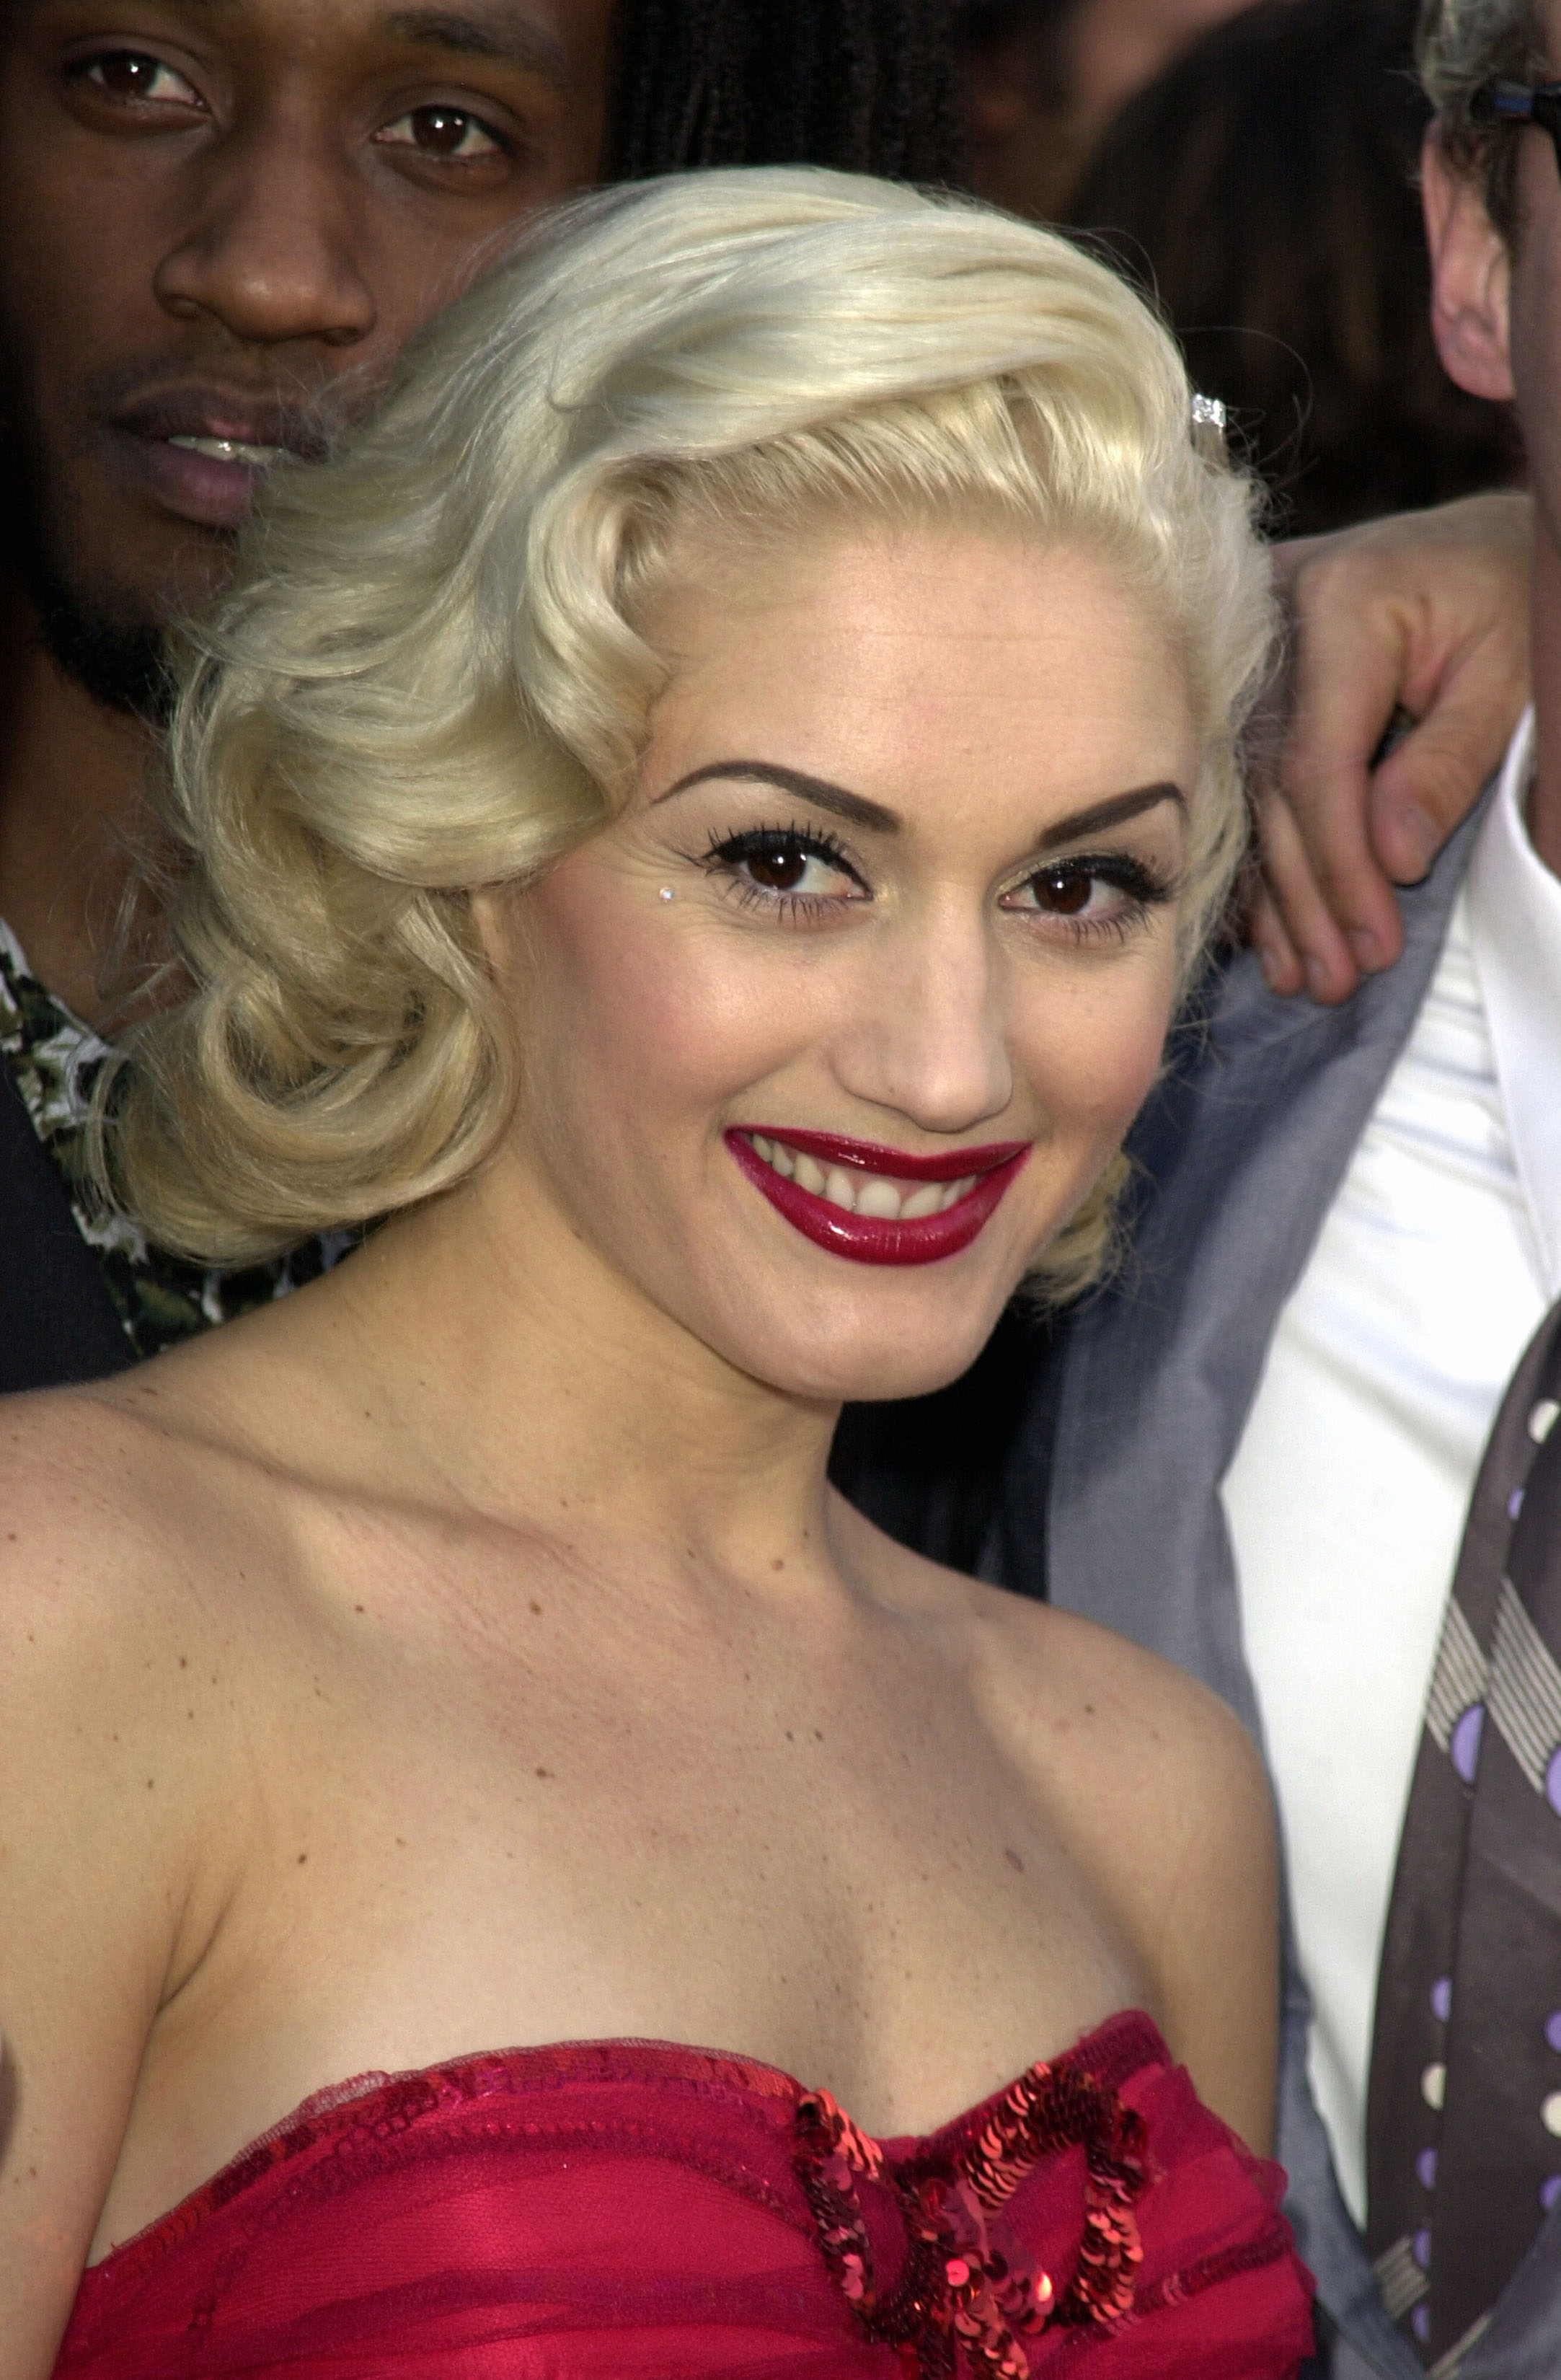 Gwen Stefani at the Grammy Awards in 2001 | Source: Getty Images